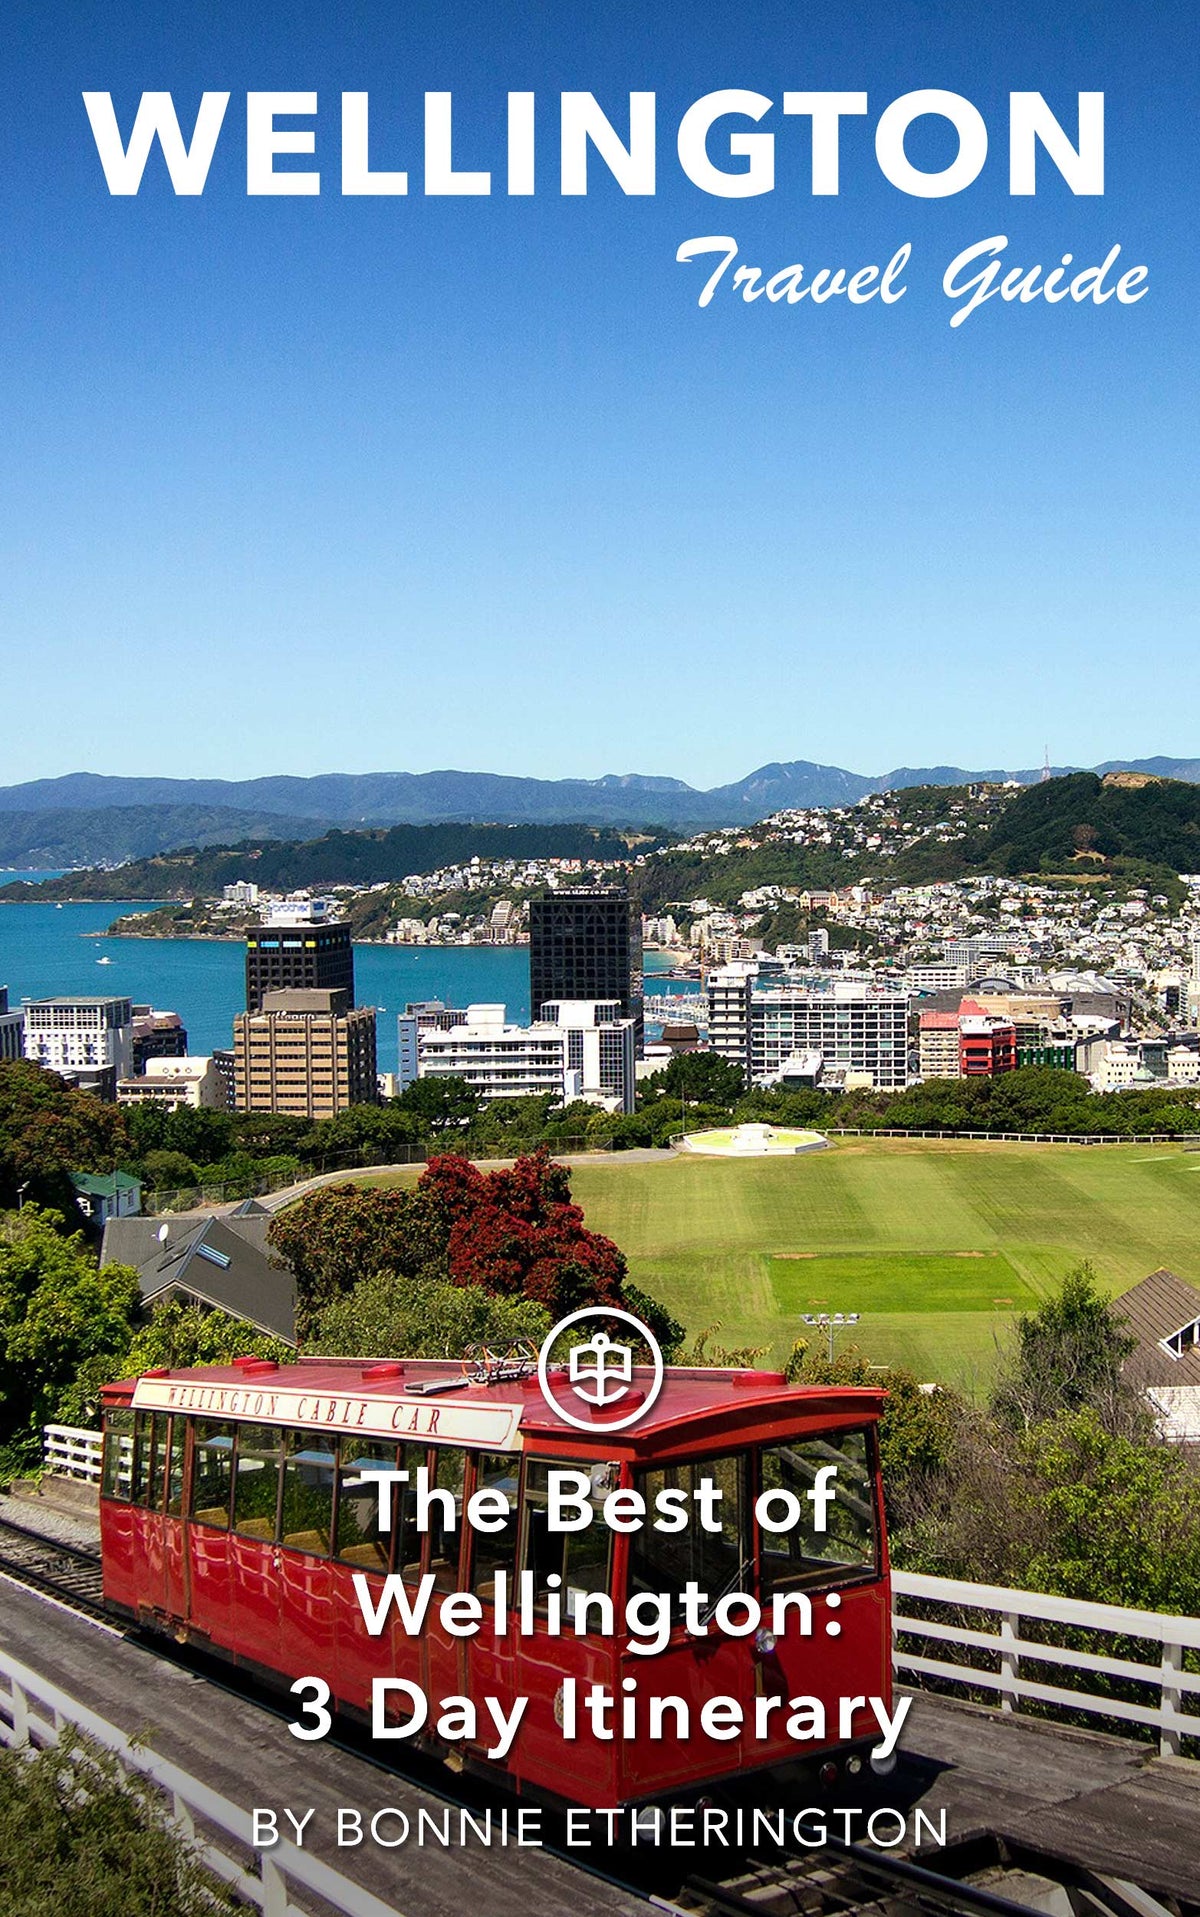 The Best of Wellington: 3-Day Itinerary